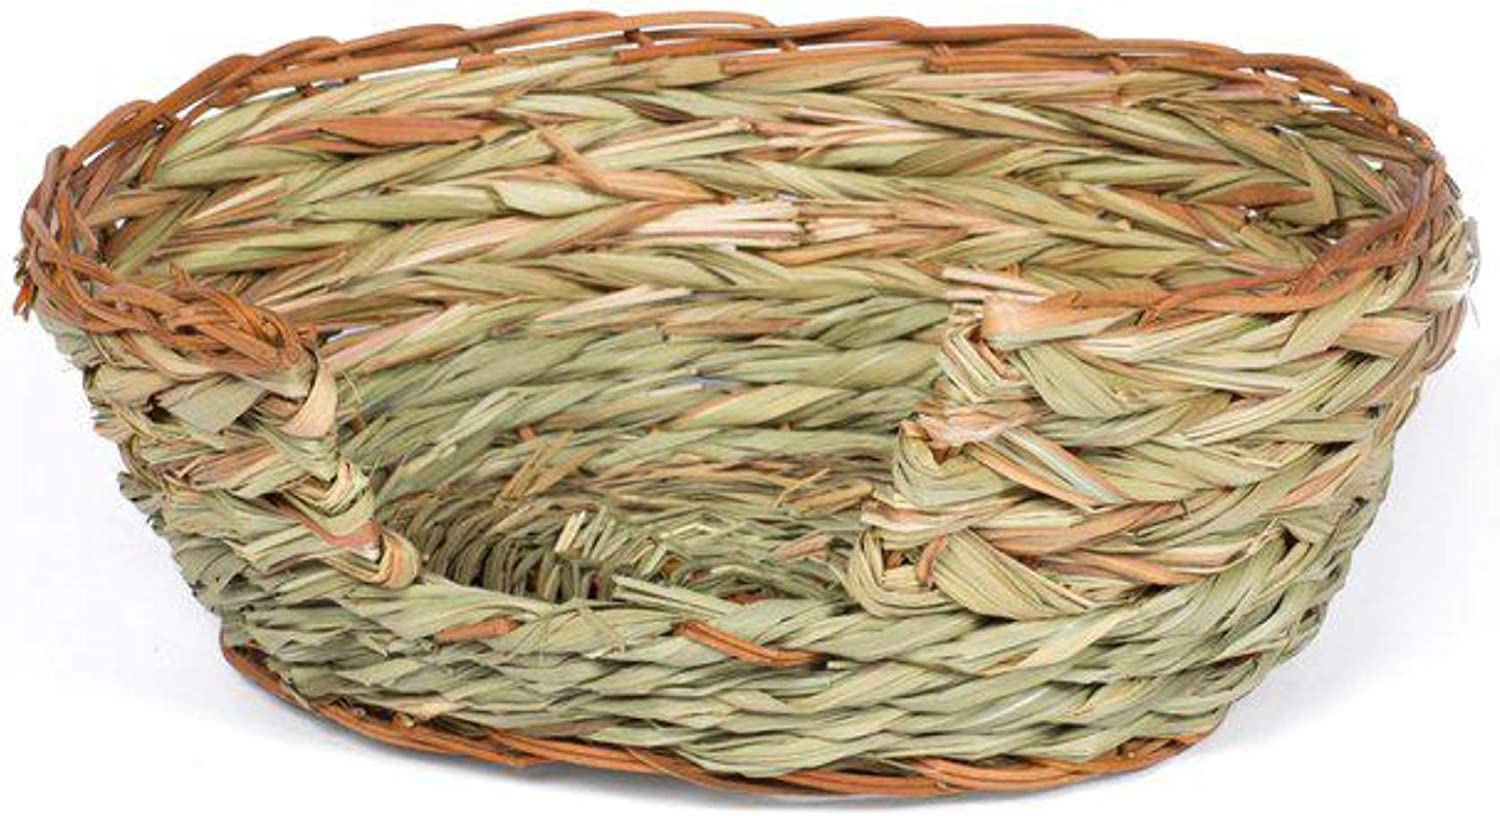 Prevue Pet Products PP-1072 Oval Pet Nest Natural Grass - Large